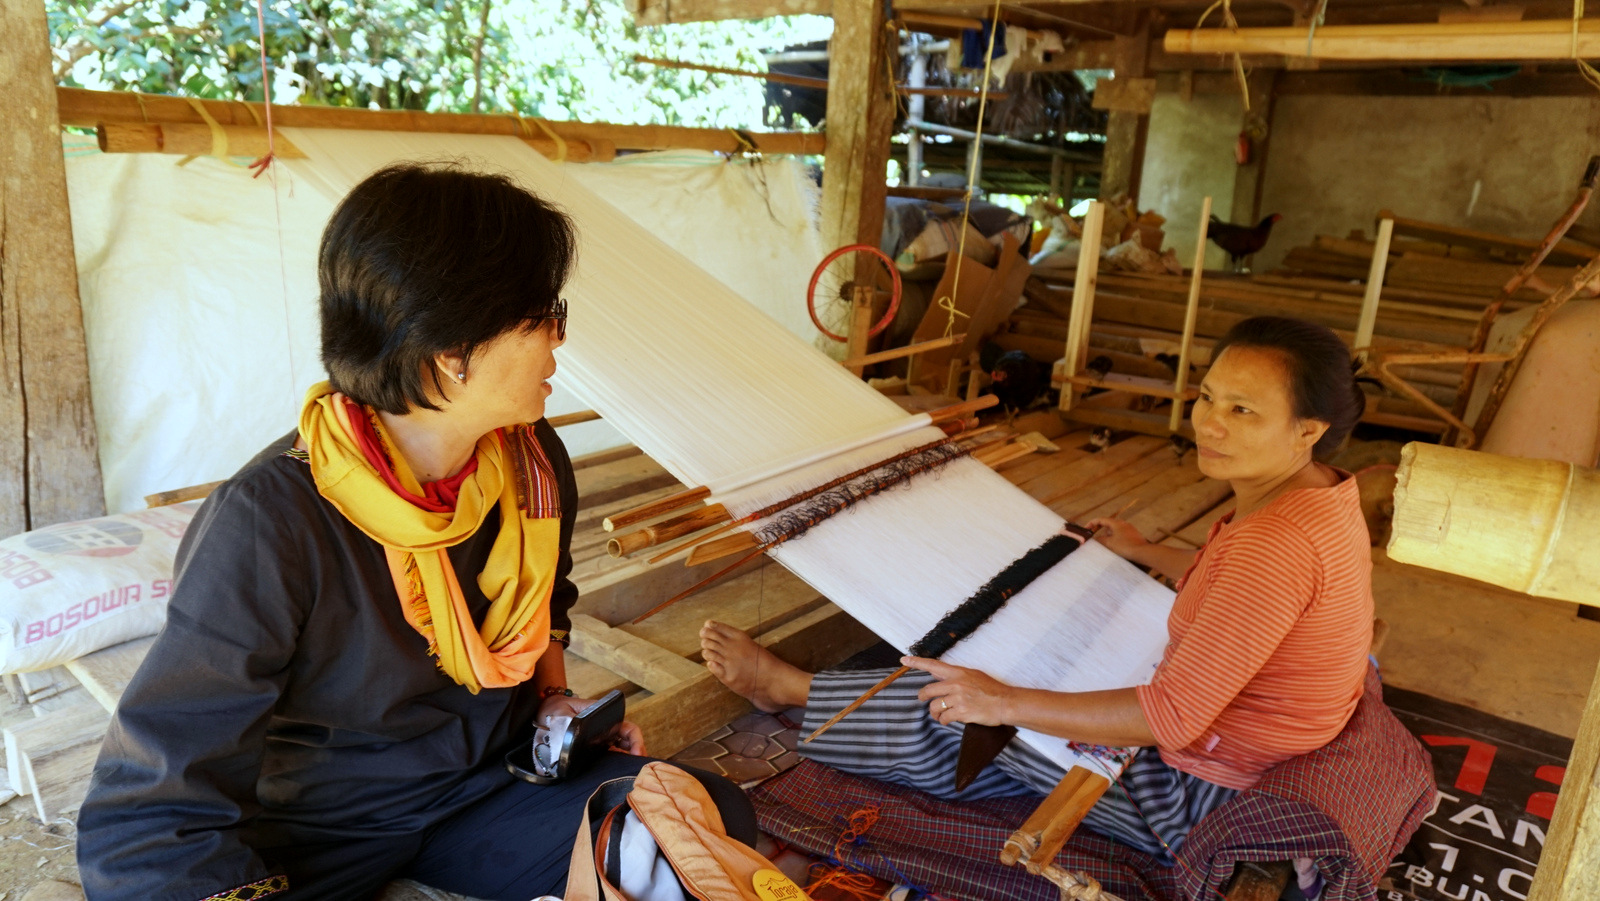 Dinny Yusuf, the founder of social enterprise Torajamelo, chats with Meri, who leads the weavers’ collective set up by Torajamelo to bring their craft to a larger market. In 2018, Torajamelo began offering tourism experiences officially, working together with the local community to do so sustainably. Photo by Upneet Kaur-Nagpal